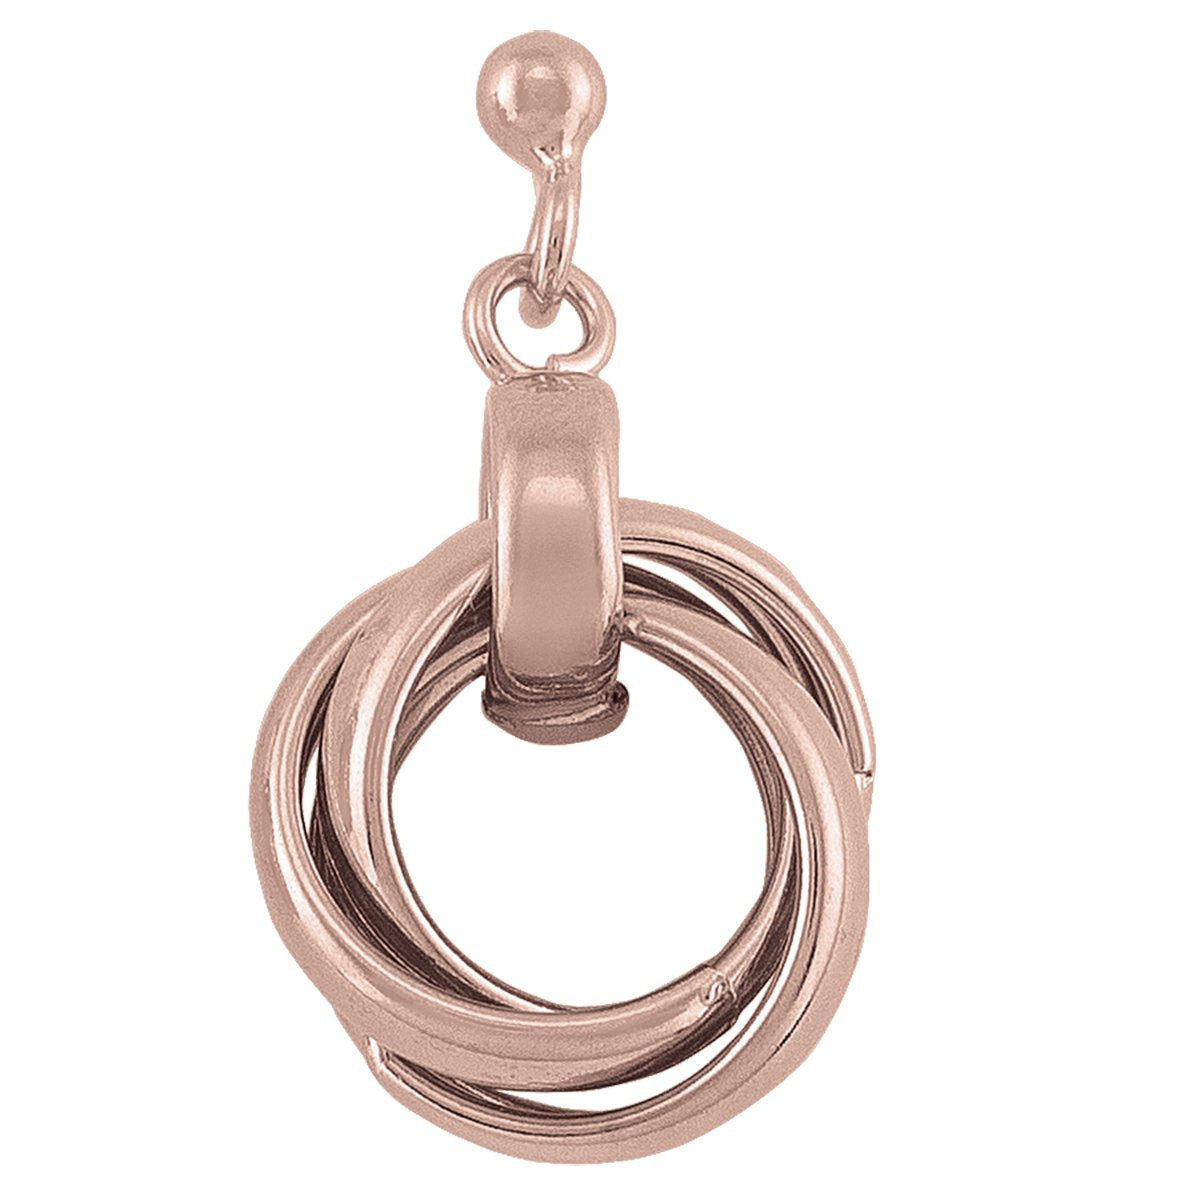 EARRINGS STERLING SILVER PINK GOLD PLATED LOVE KNOT DROP 